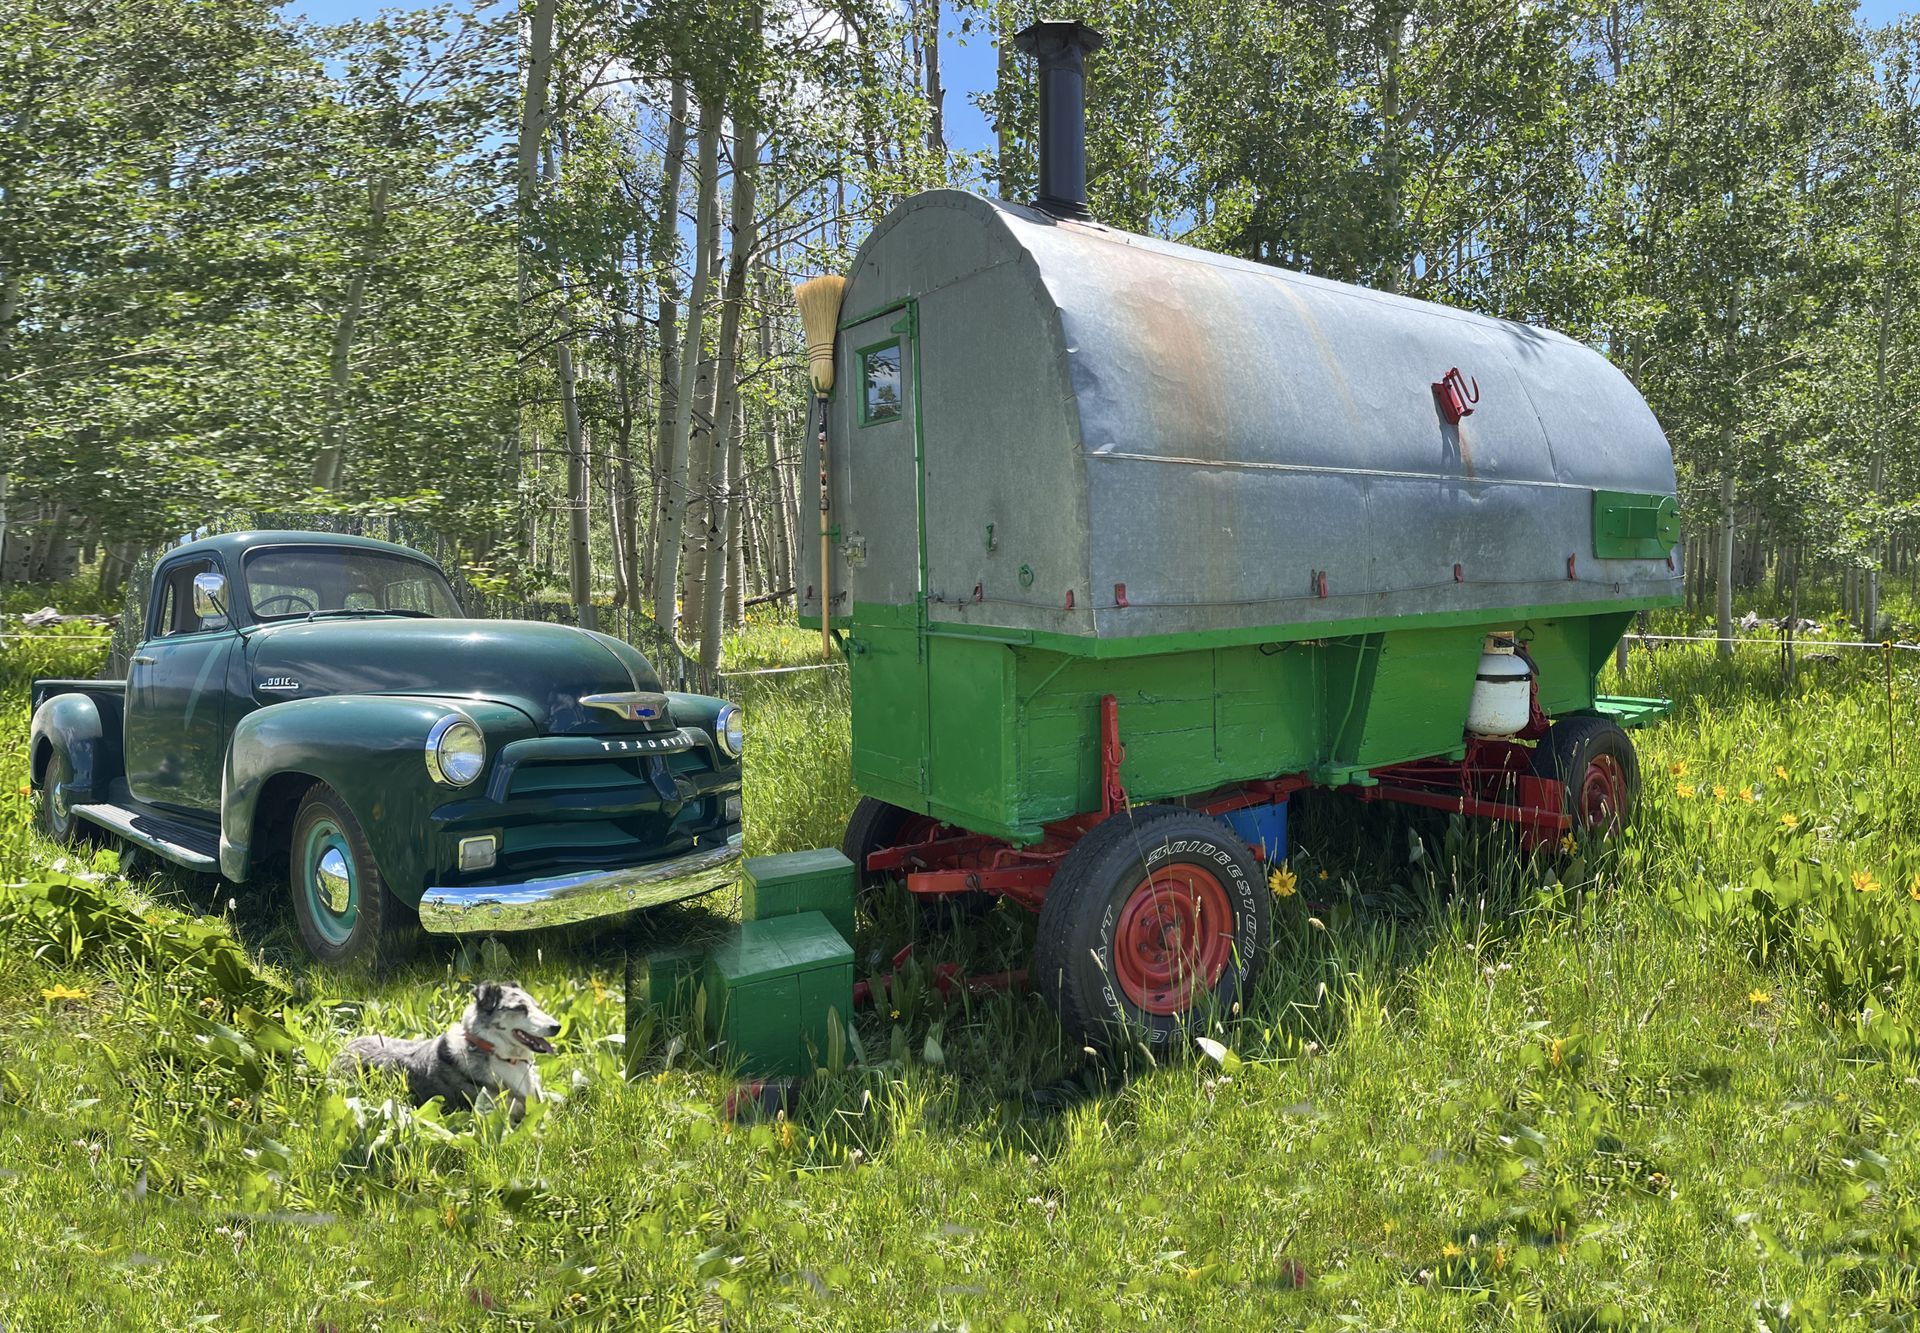 A green truck and a green trailer are parked in a grassy field.